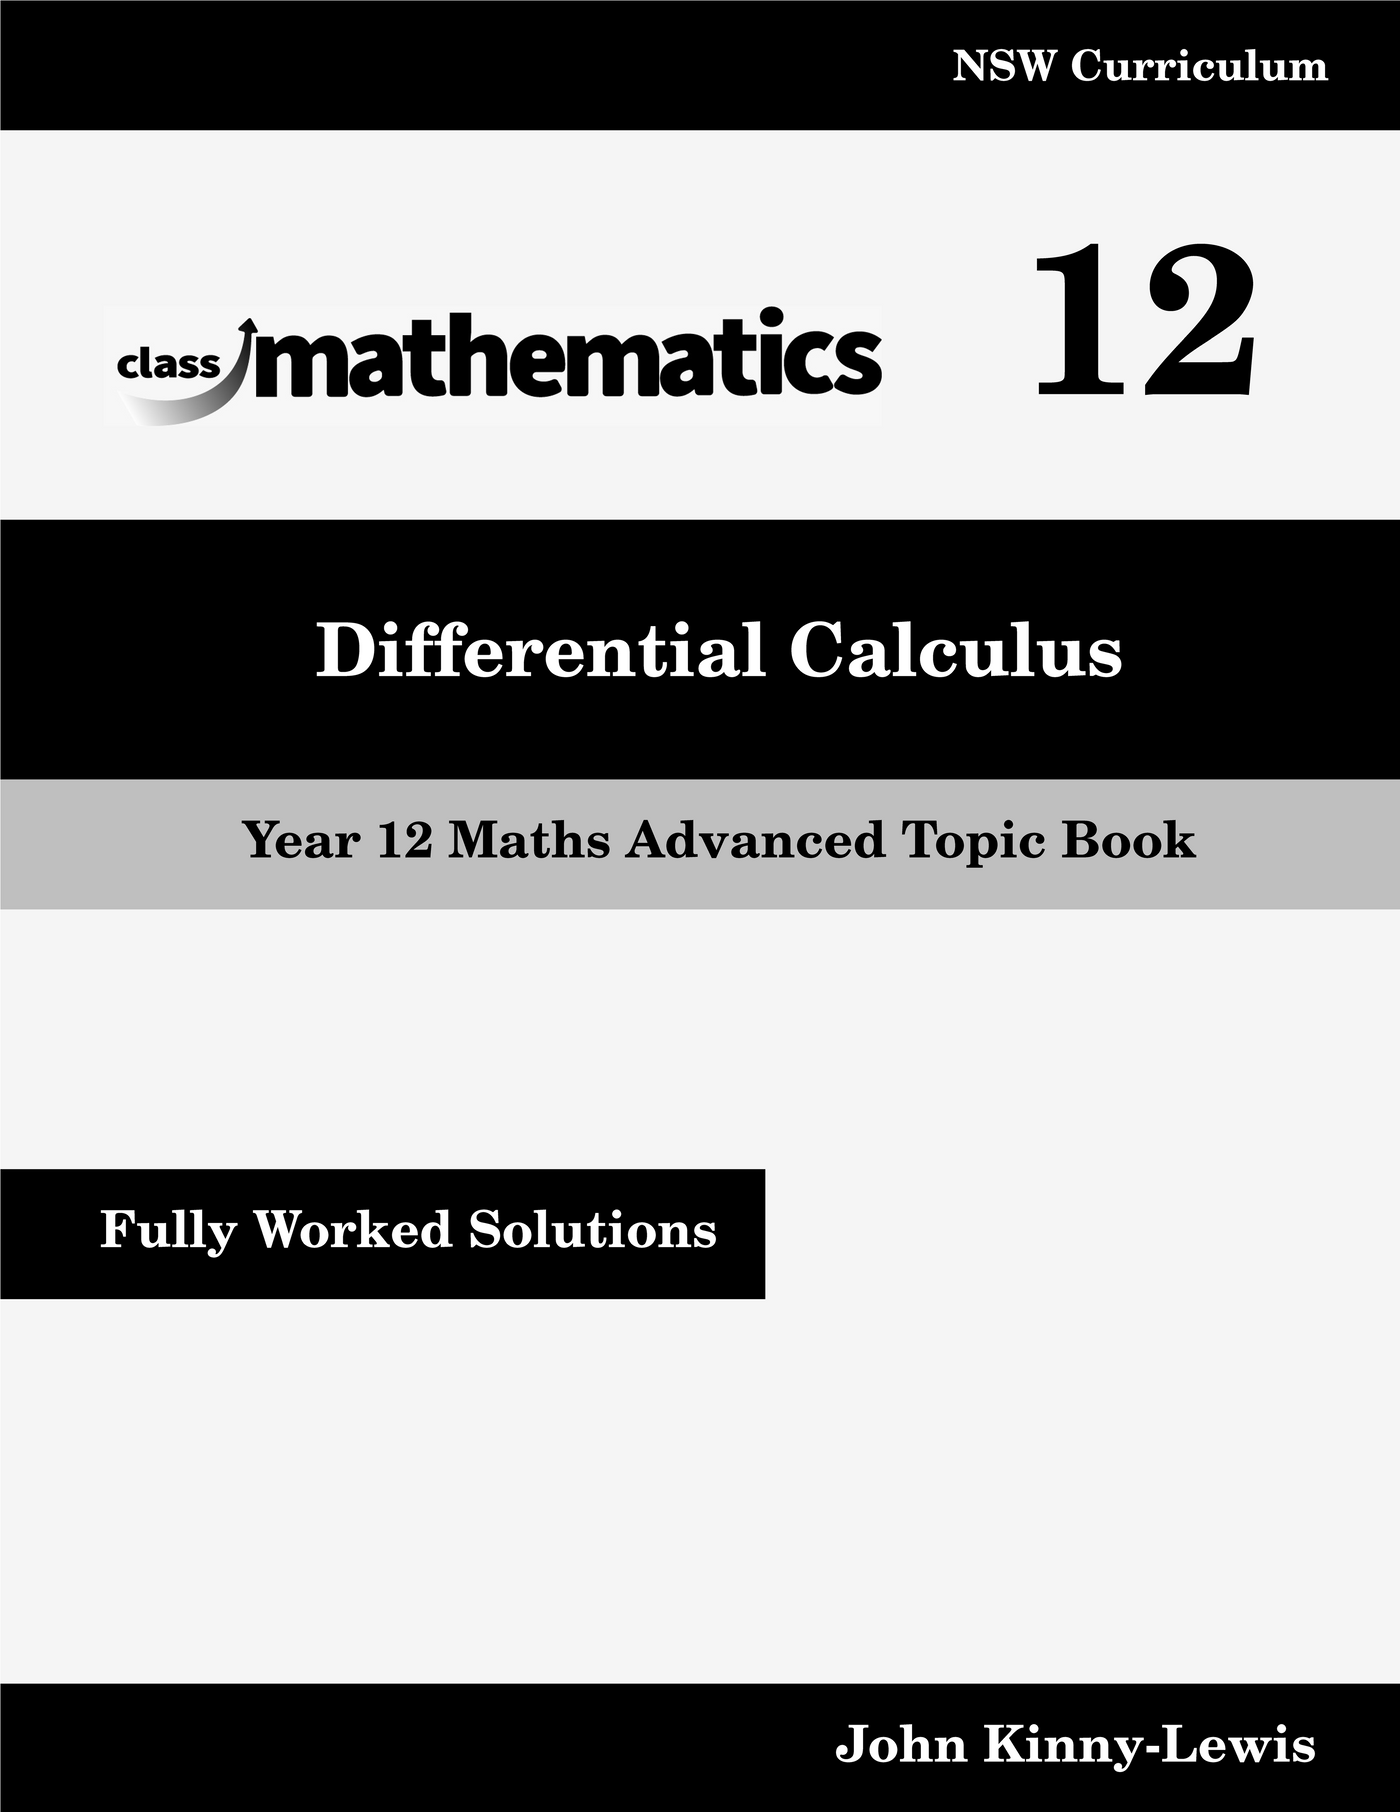 NSW Year 12 Maths Advanced - Differential Calculus